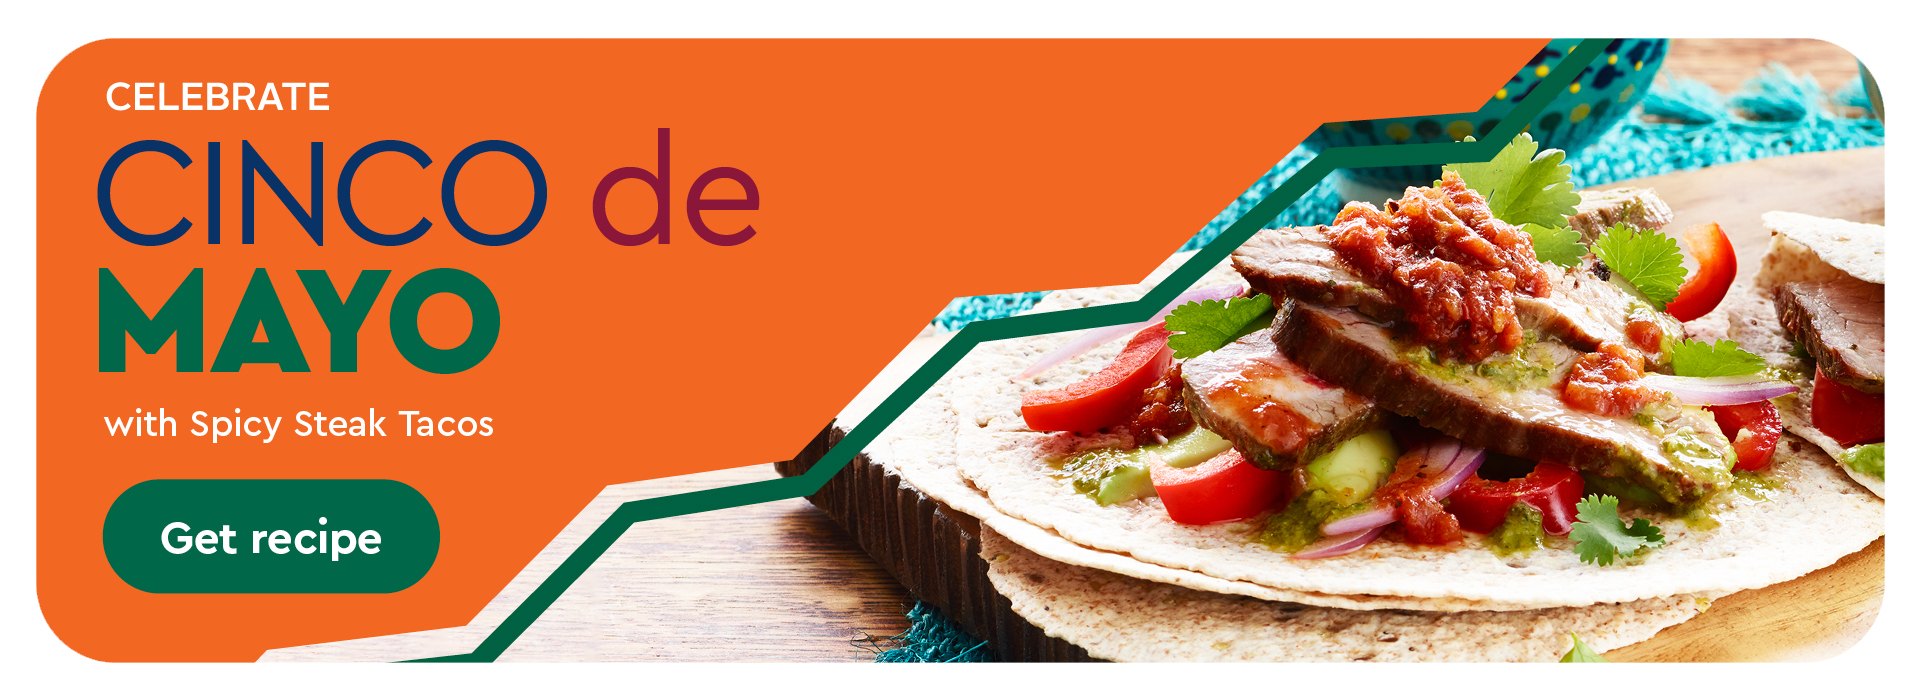 Text Reading 'Celebrate Cinco de Mayo with Spicy Steak Tacos. 'Get recipe' from the button given below.'